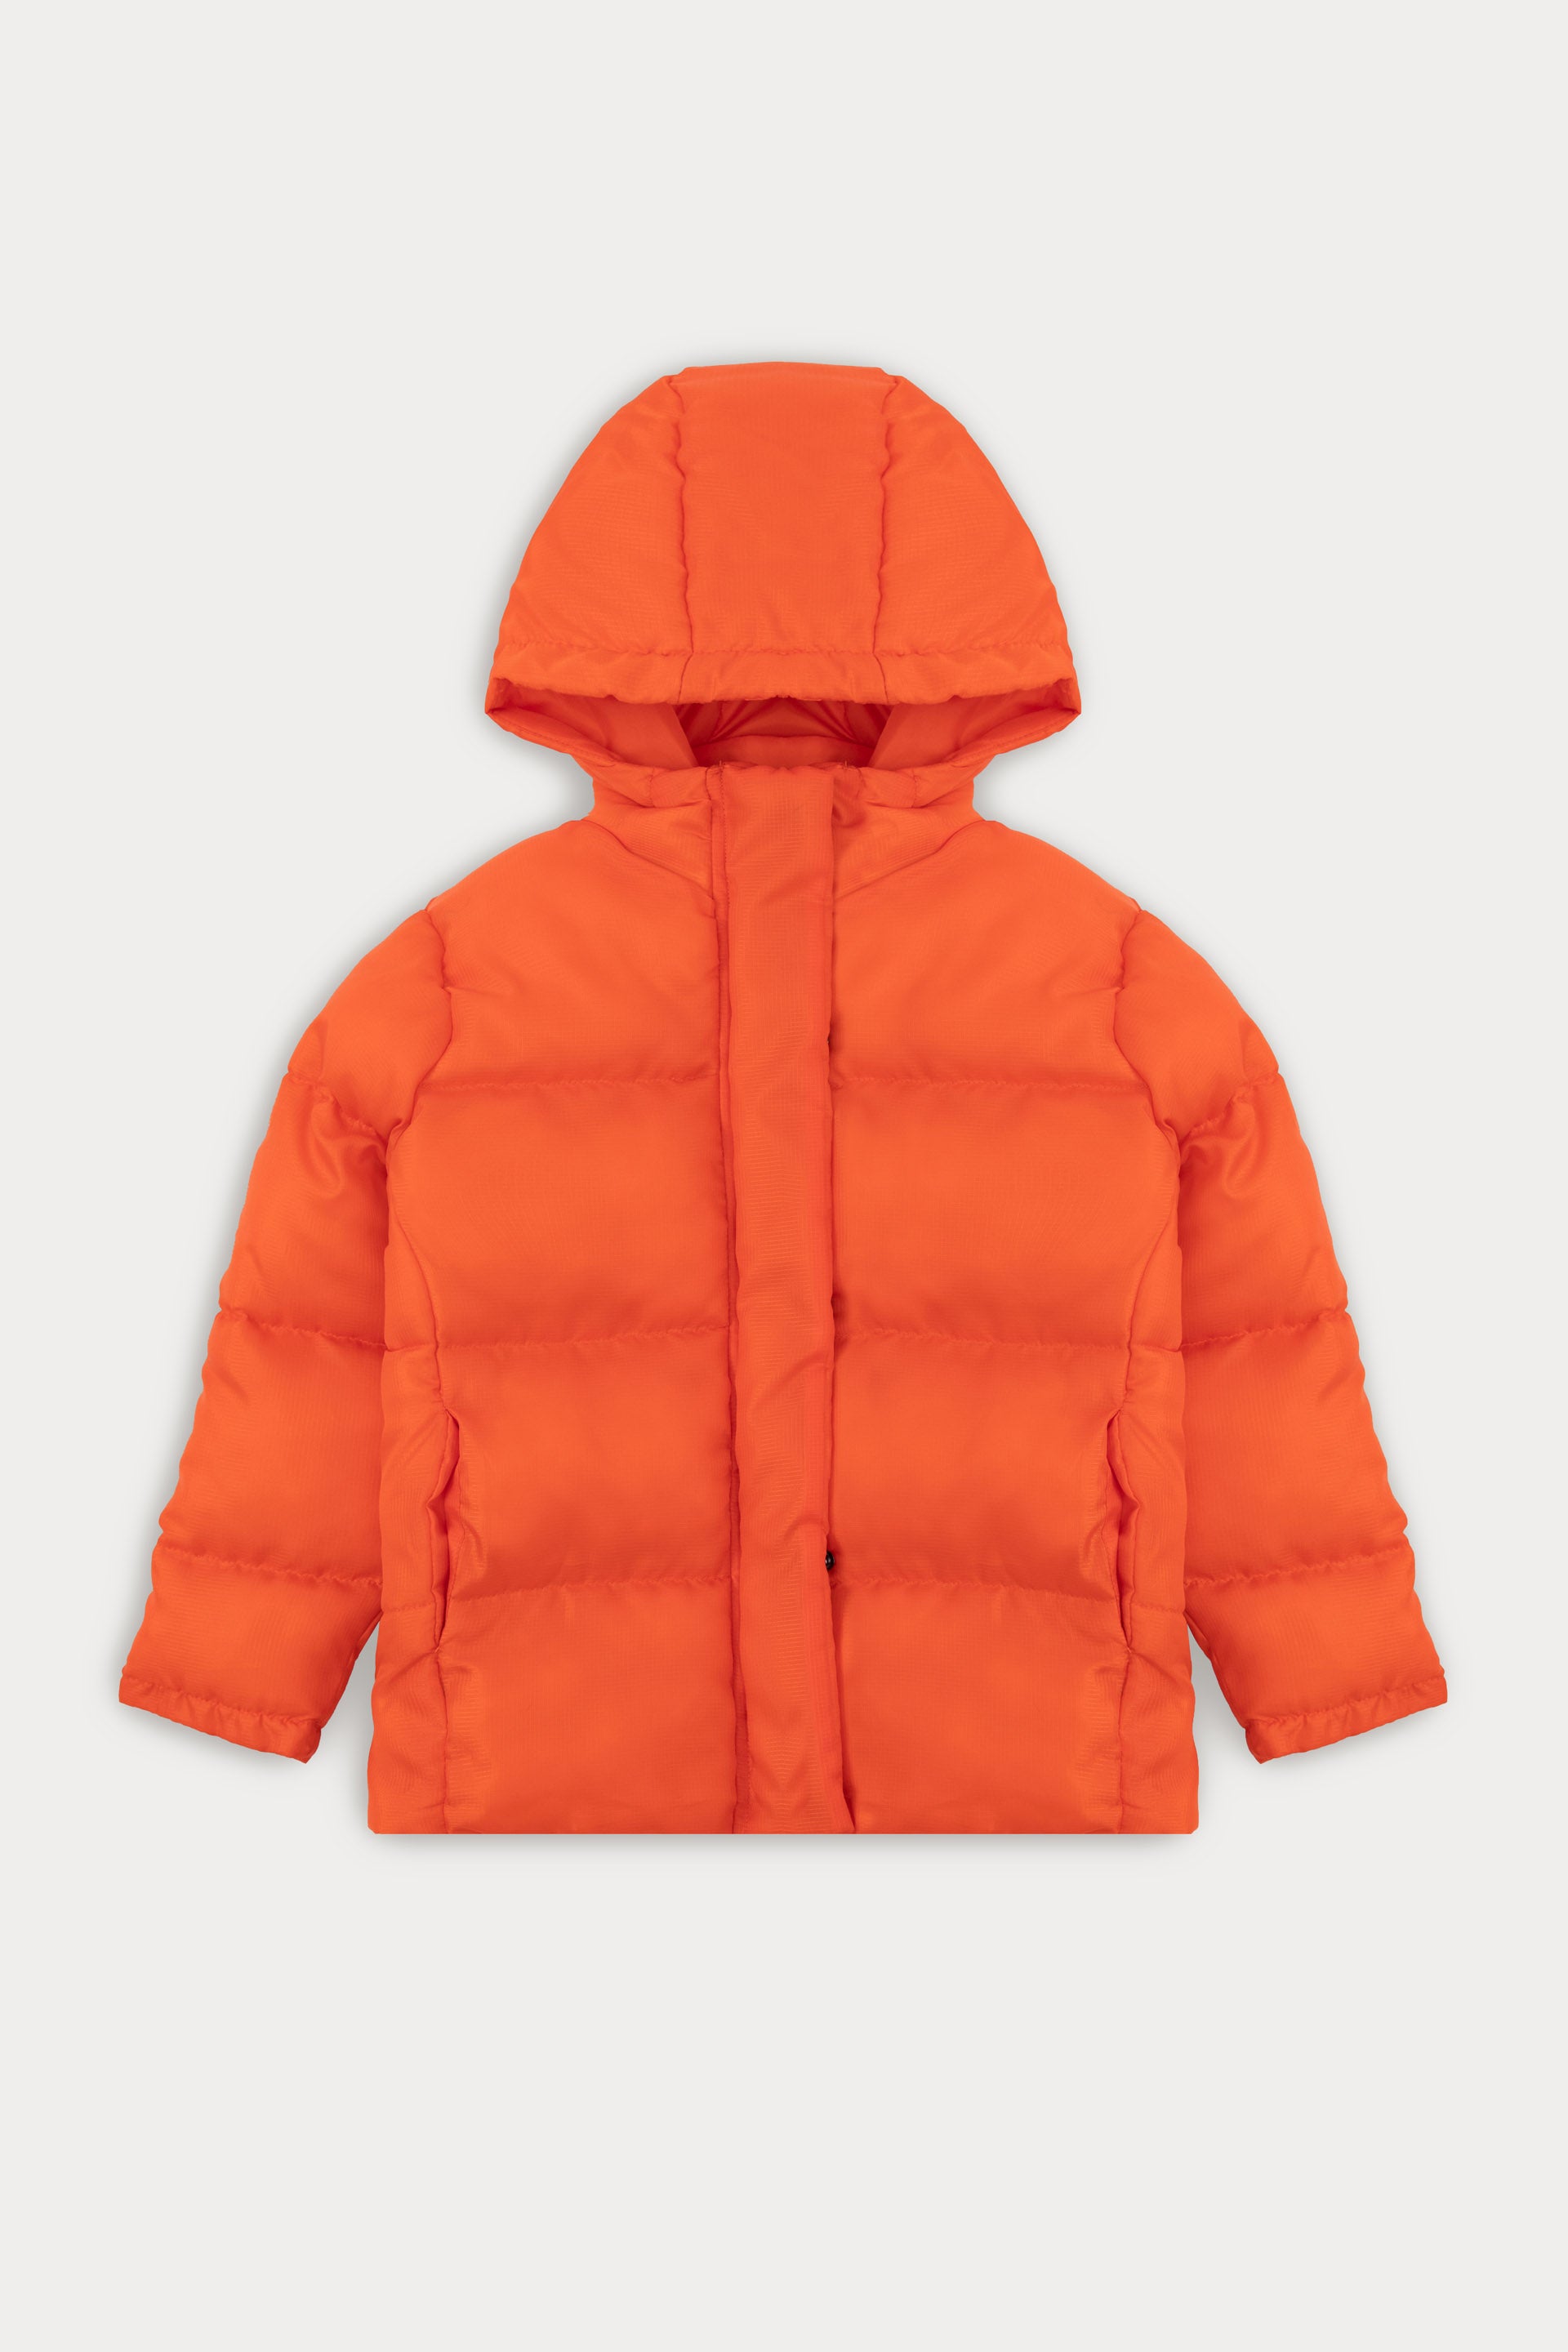 Junior Boys' Jackets and Coats Sale Collection 2023 | Benetton